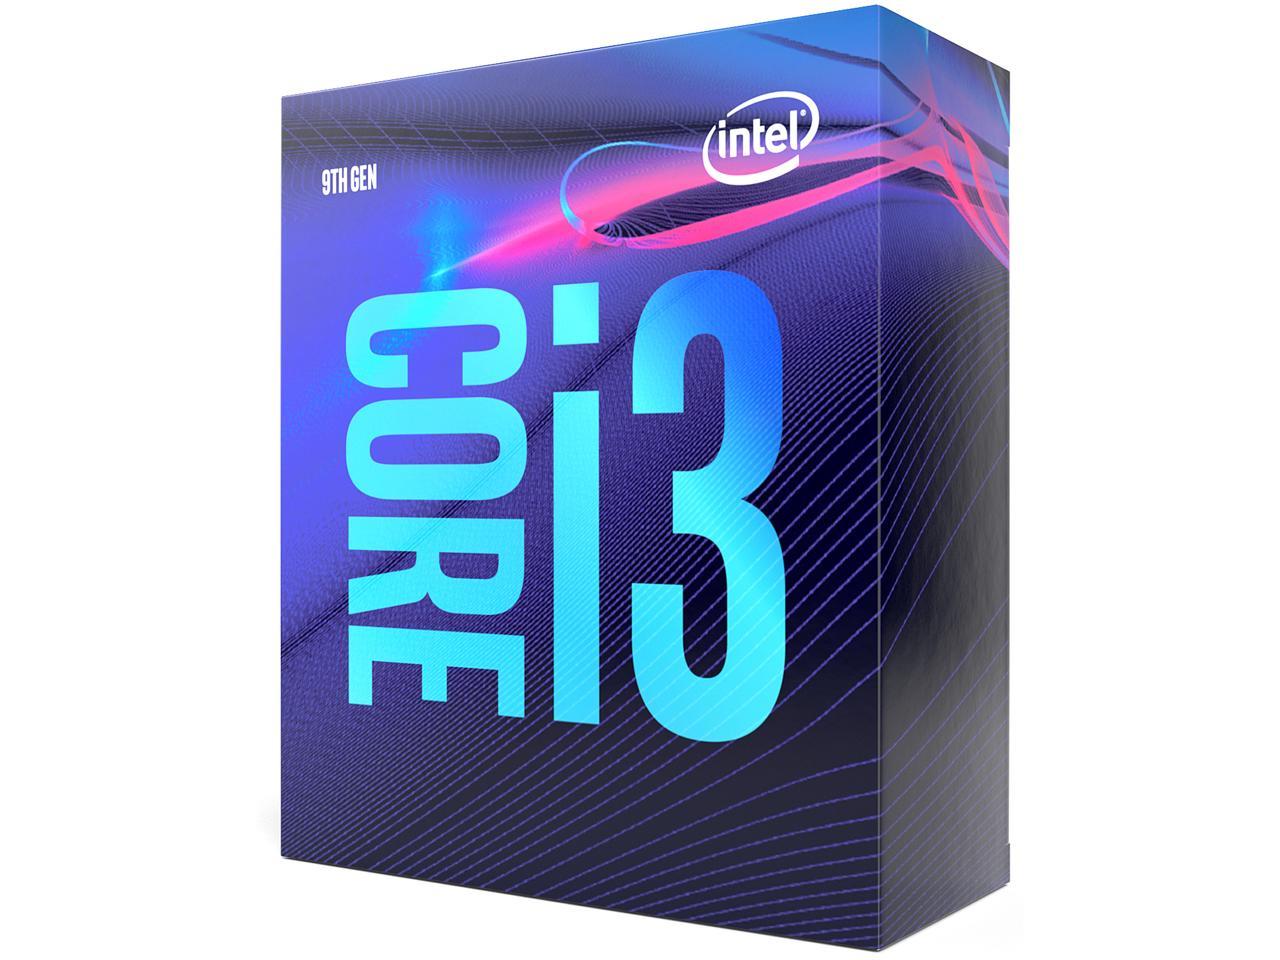 i3-N305 Intel Unboxed and OEM Processor